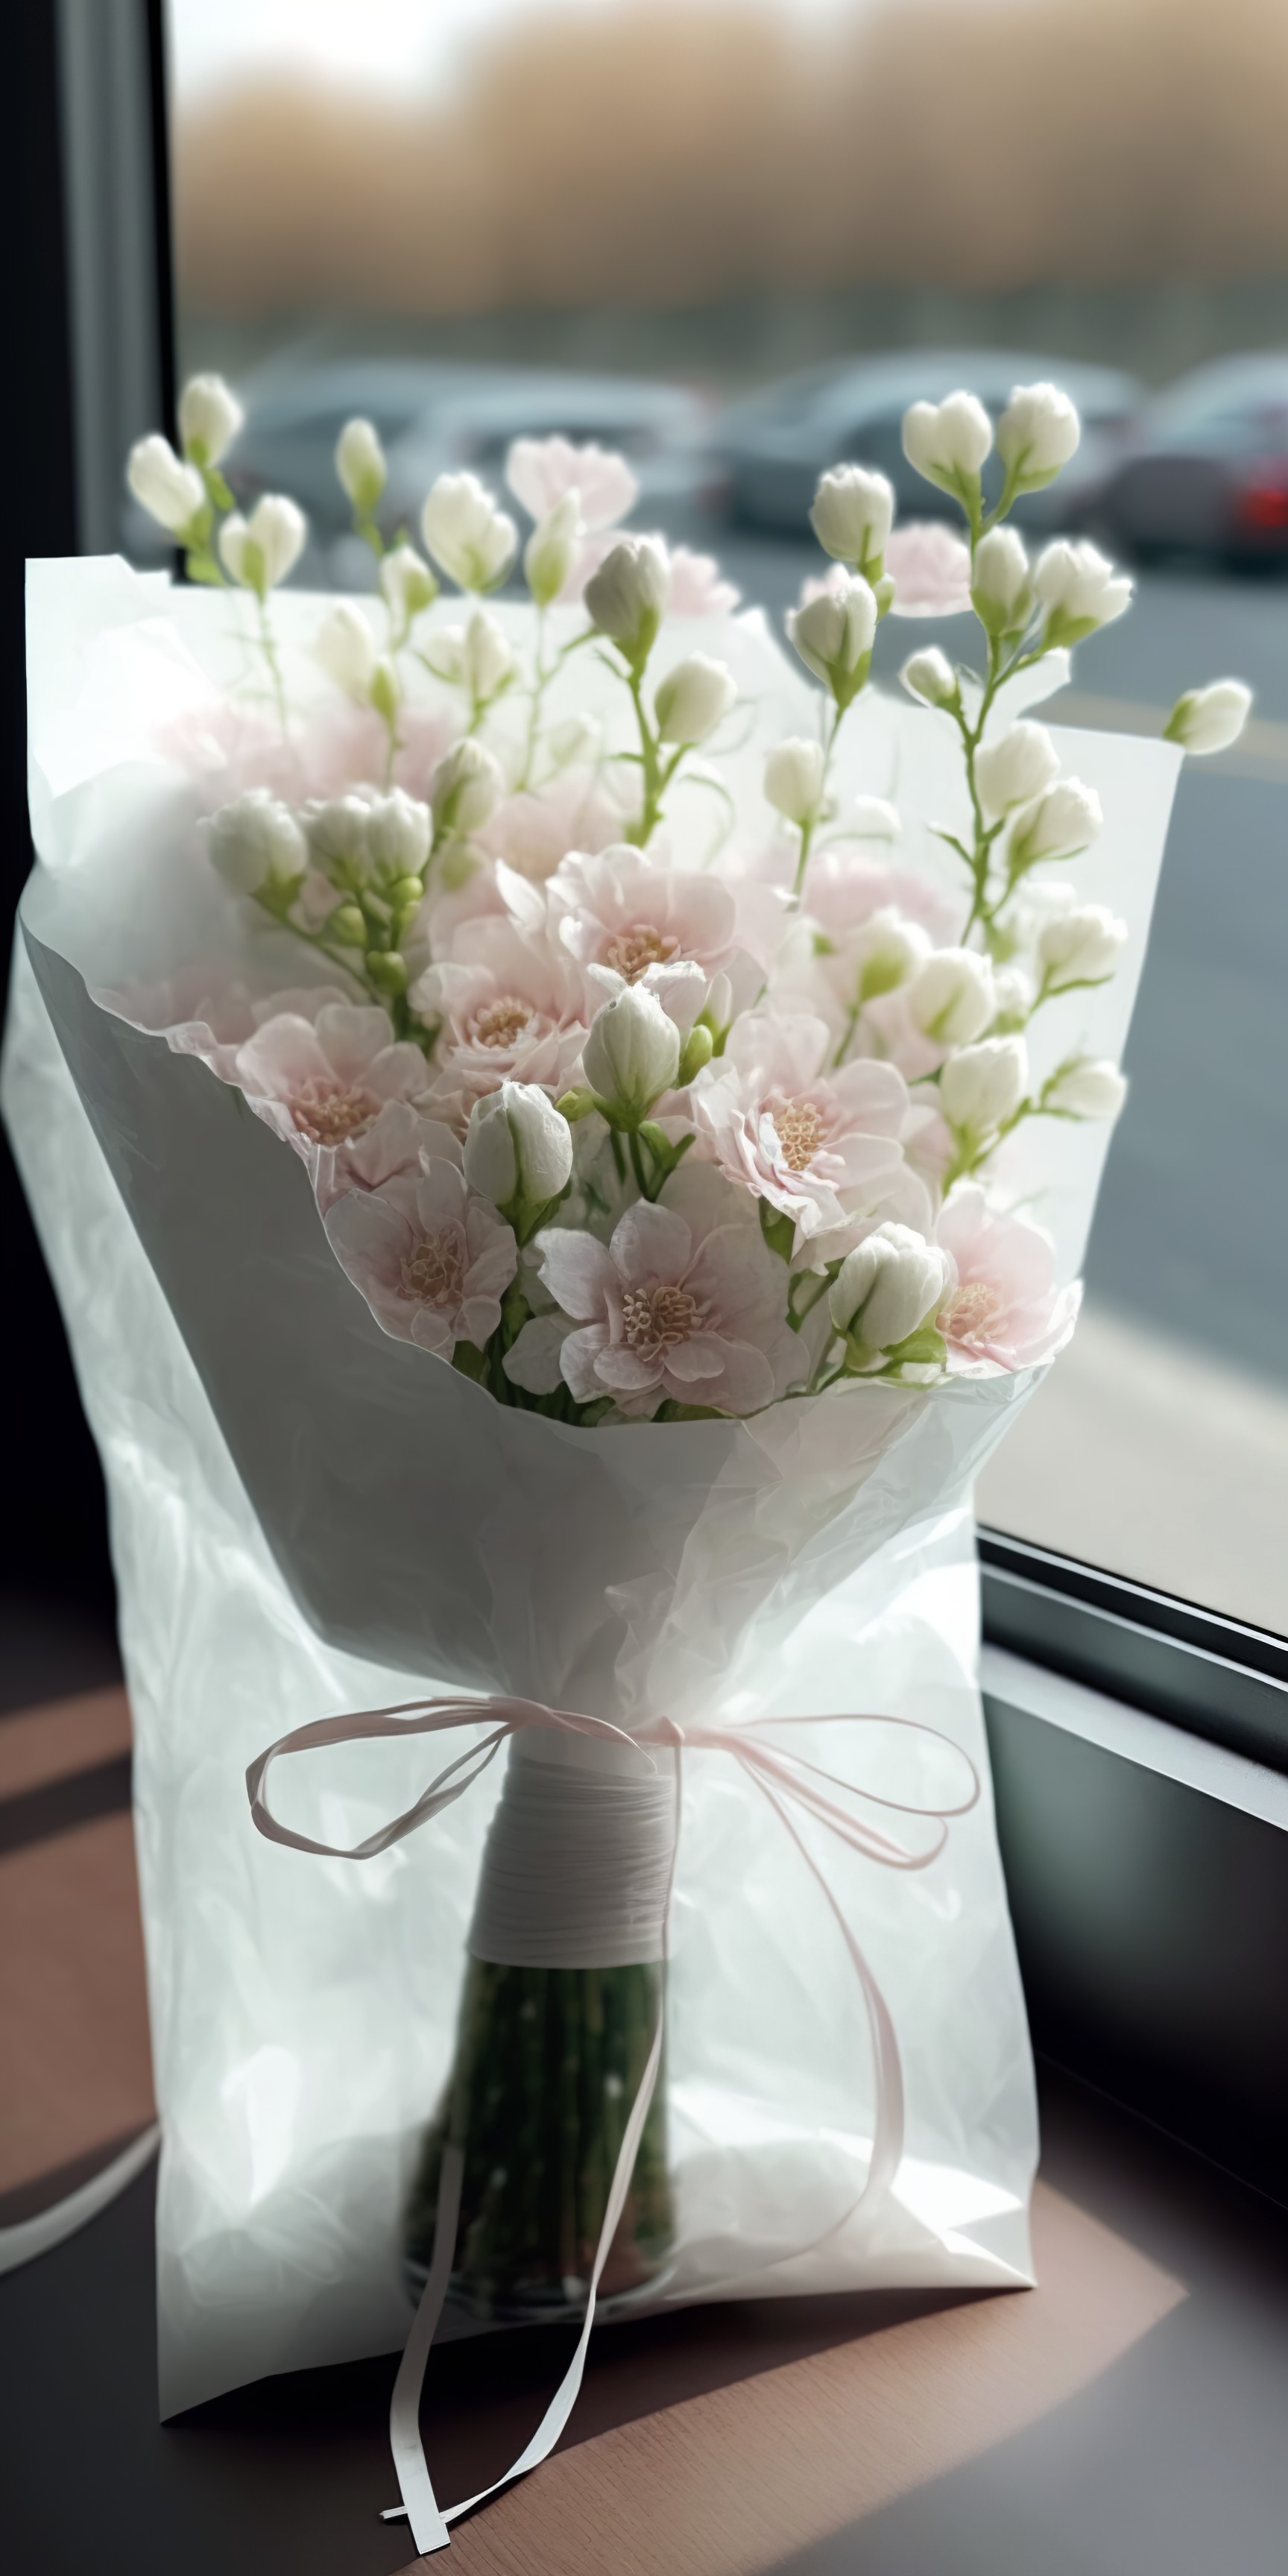 bouquet of flowers by the window